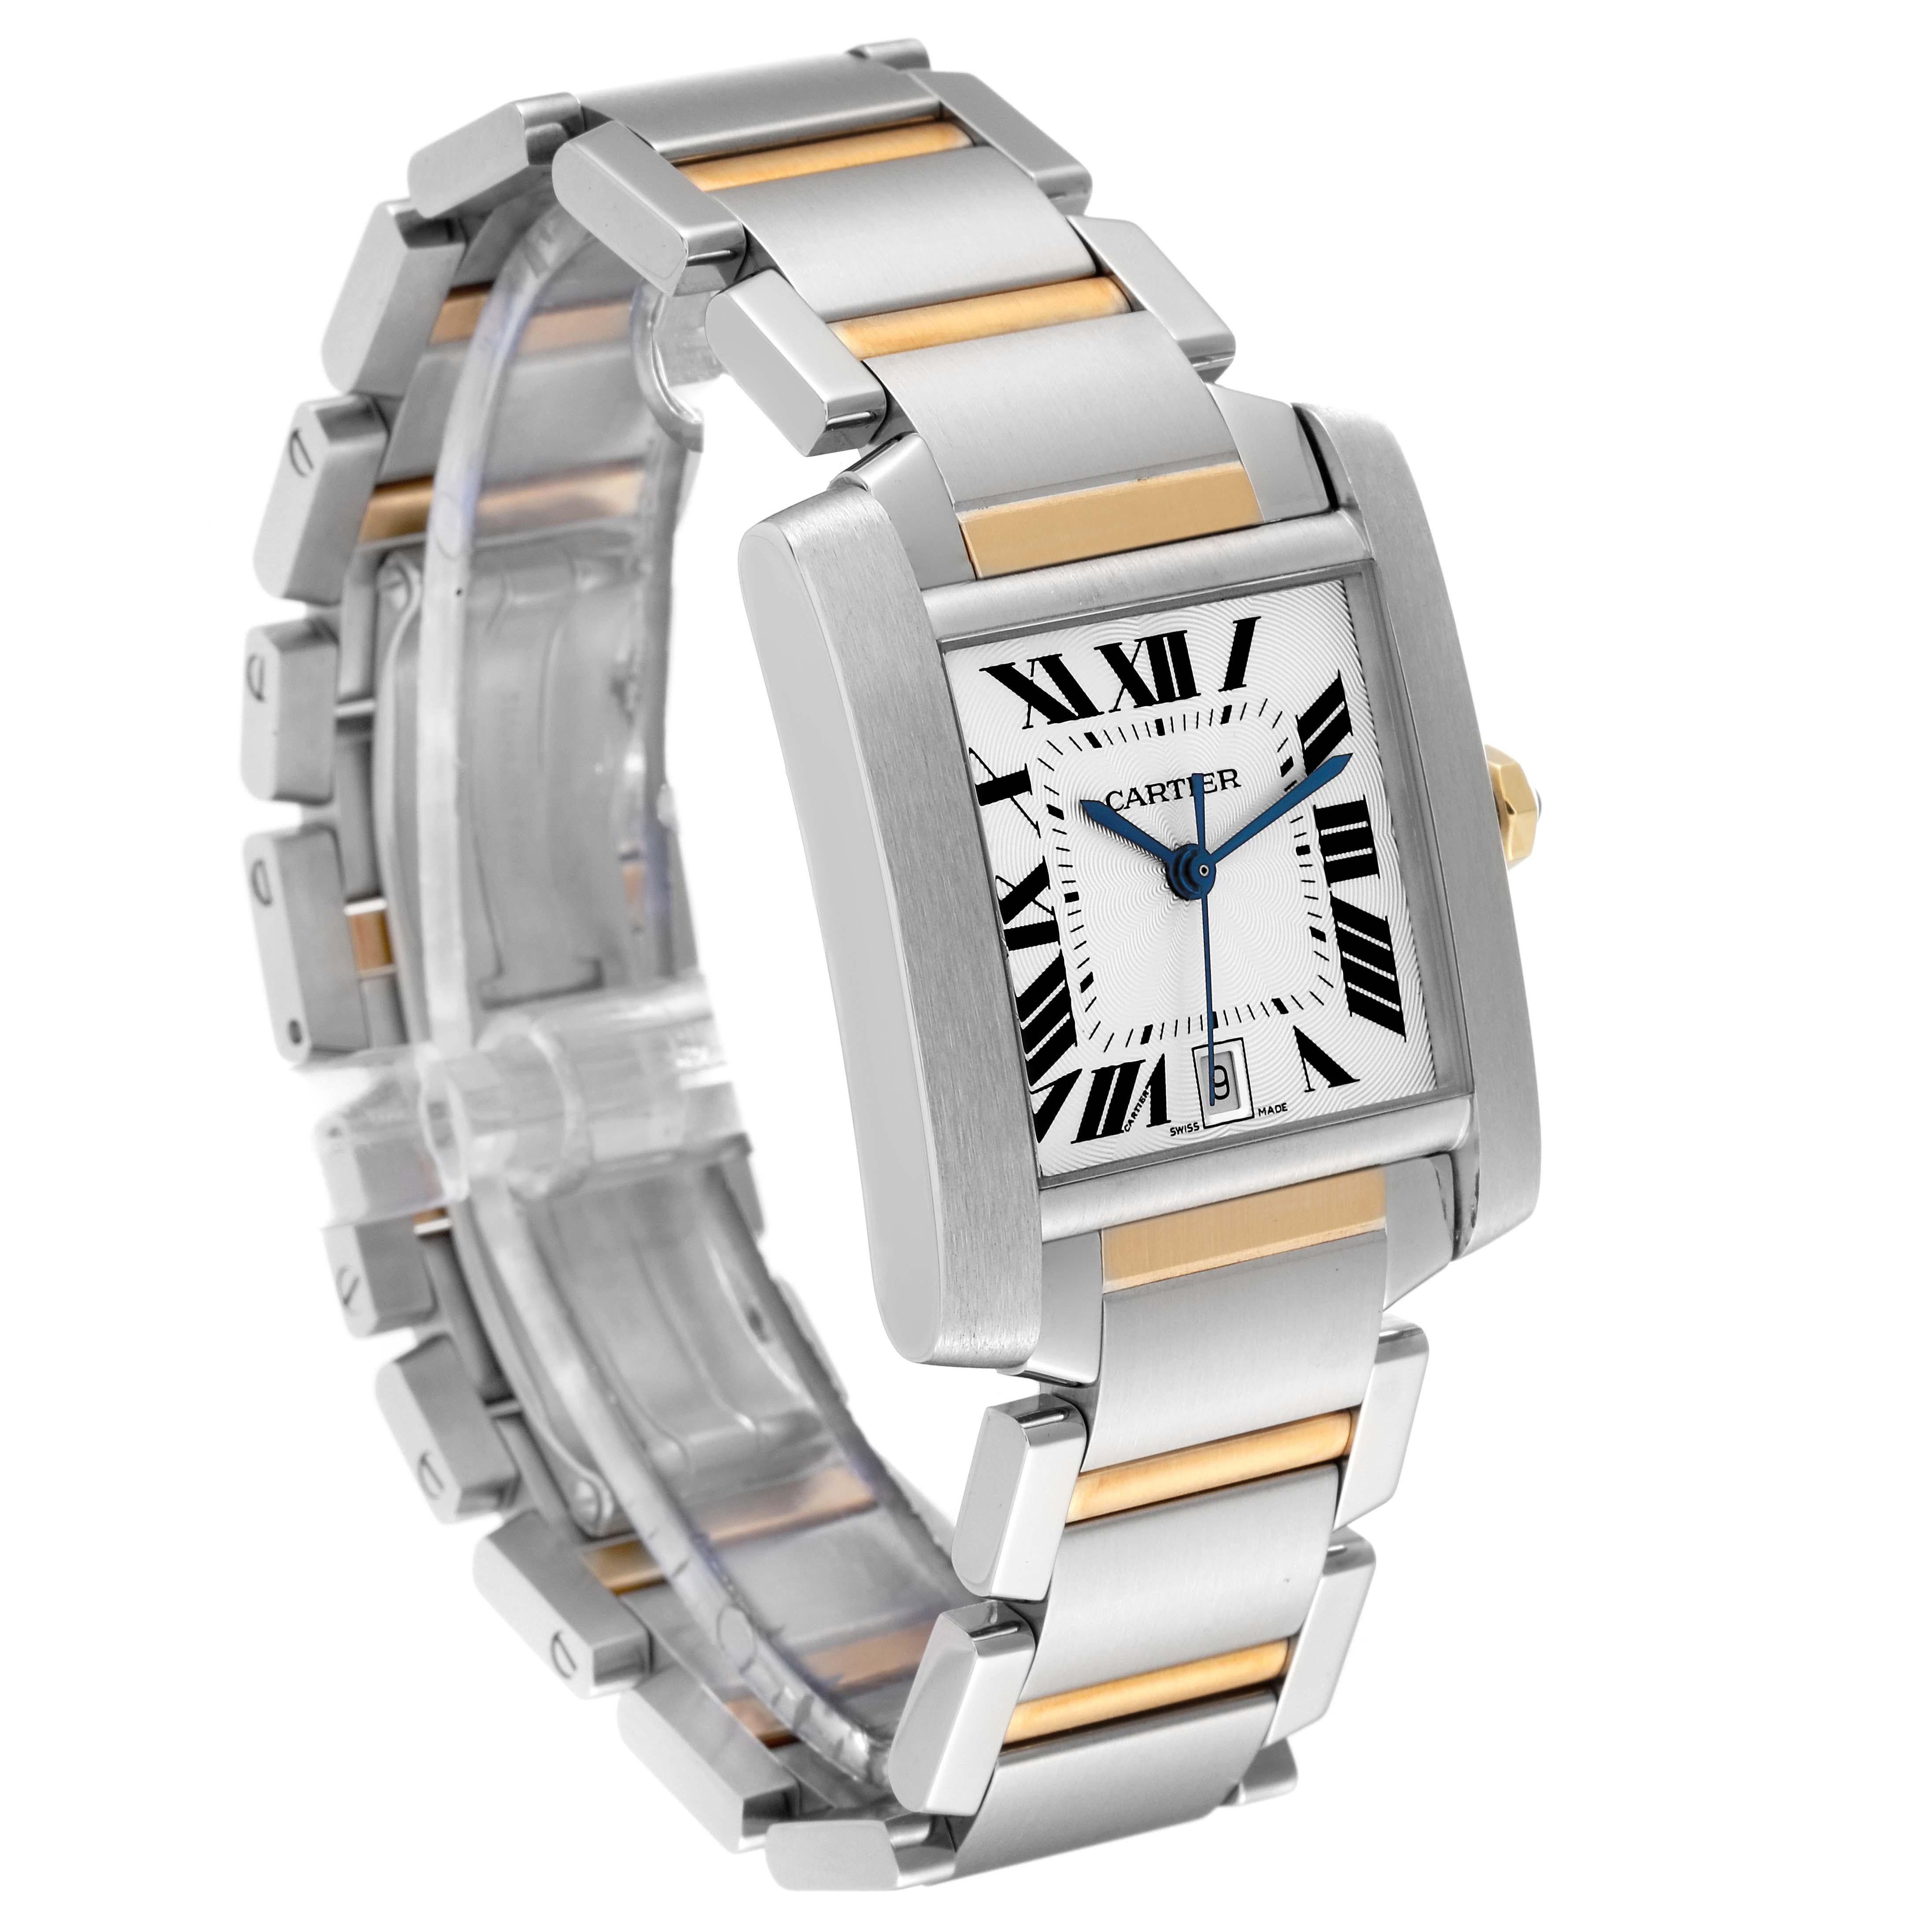 Cartier Tank Francaise Steel Yellow Gold Silver Dial Mens Watch W51005Q4 In Excellent Condition For Sale In Atlanta, GA